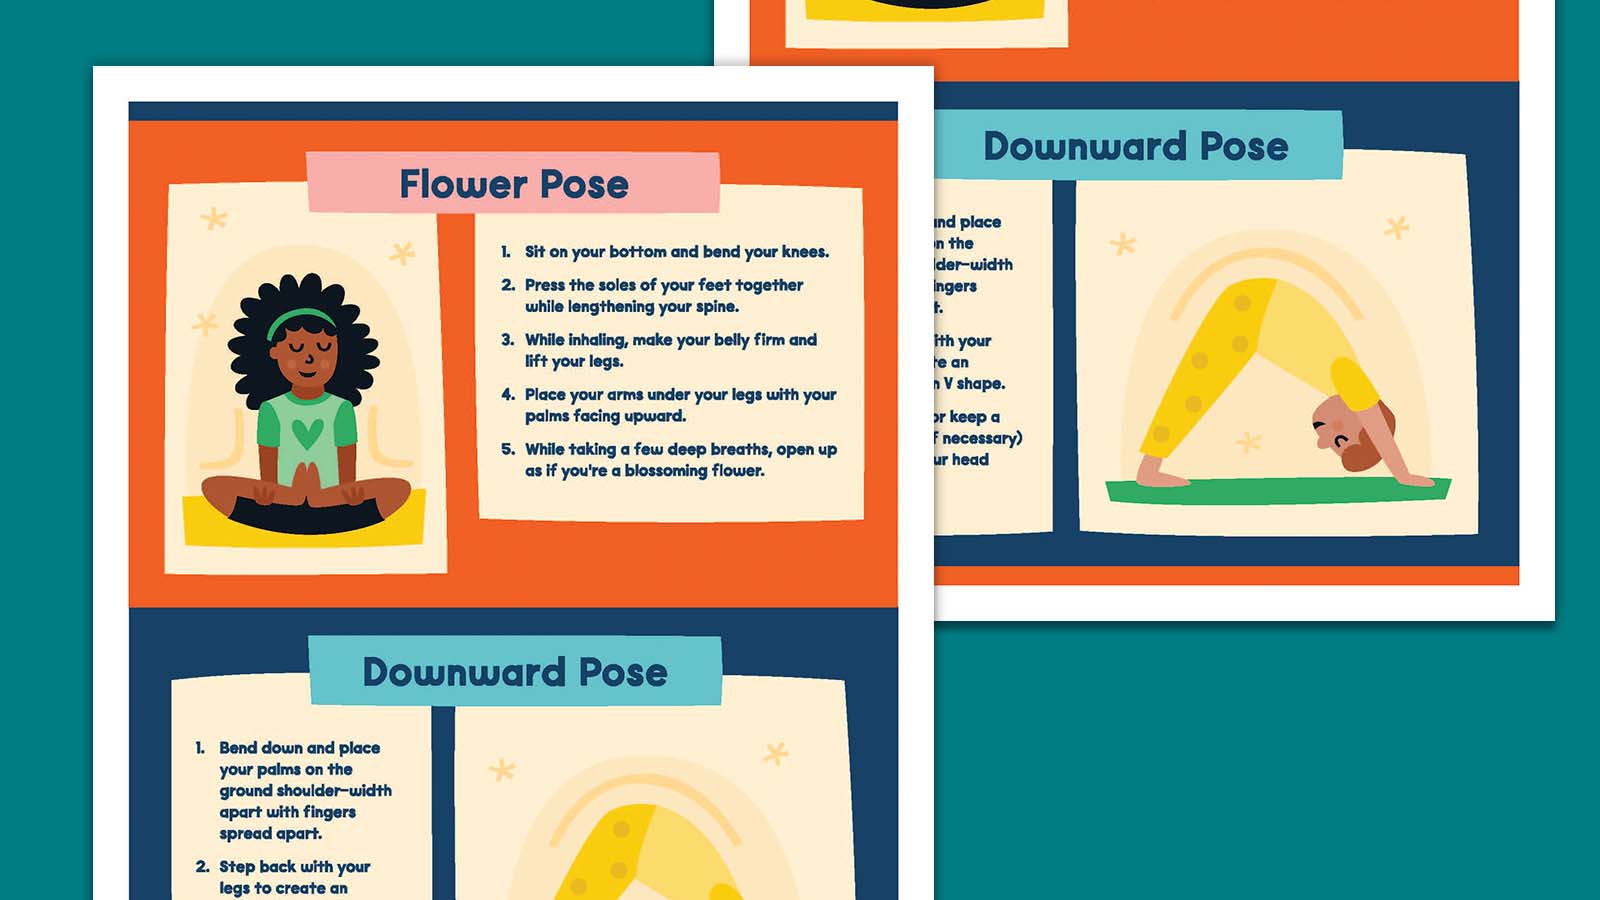 Printable yoga poses for kids posters featuring Flower Pose and Downward Pose.